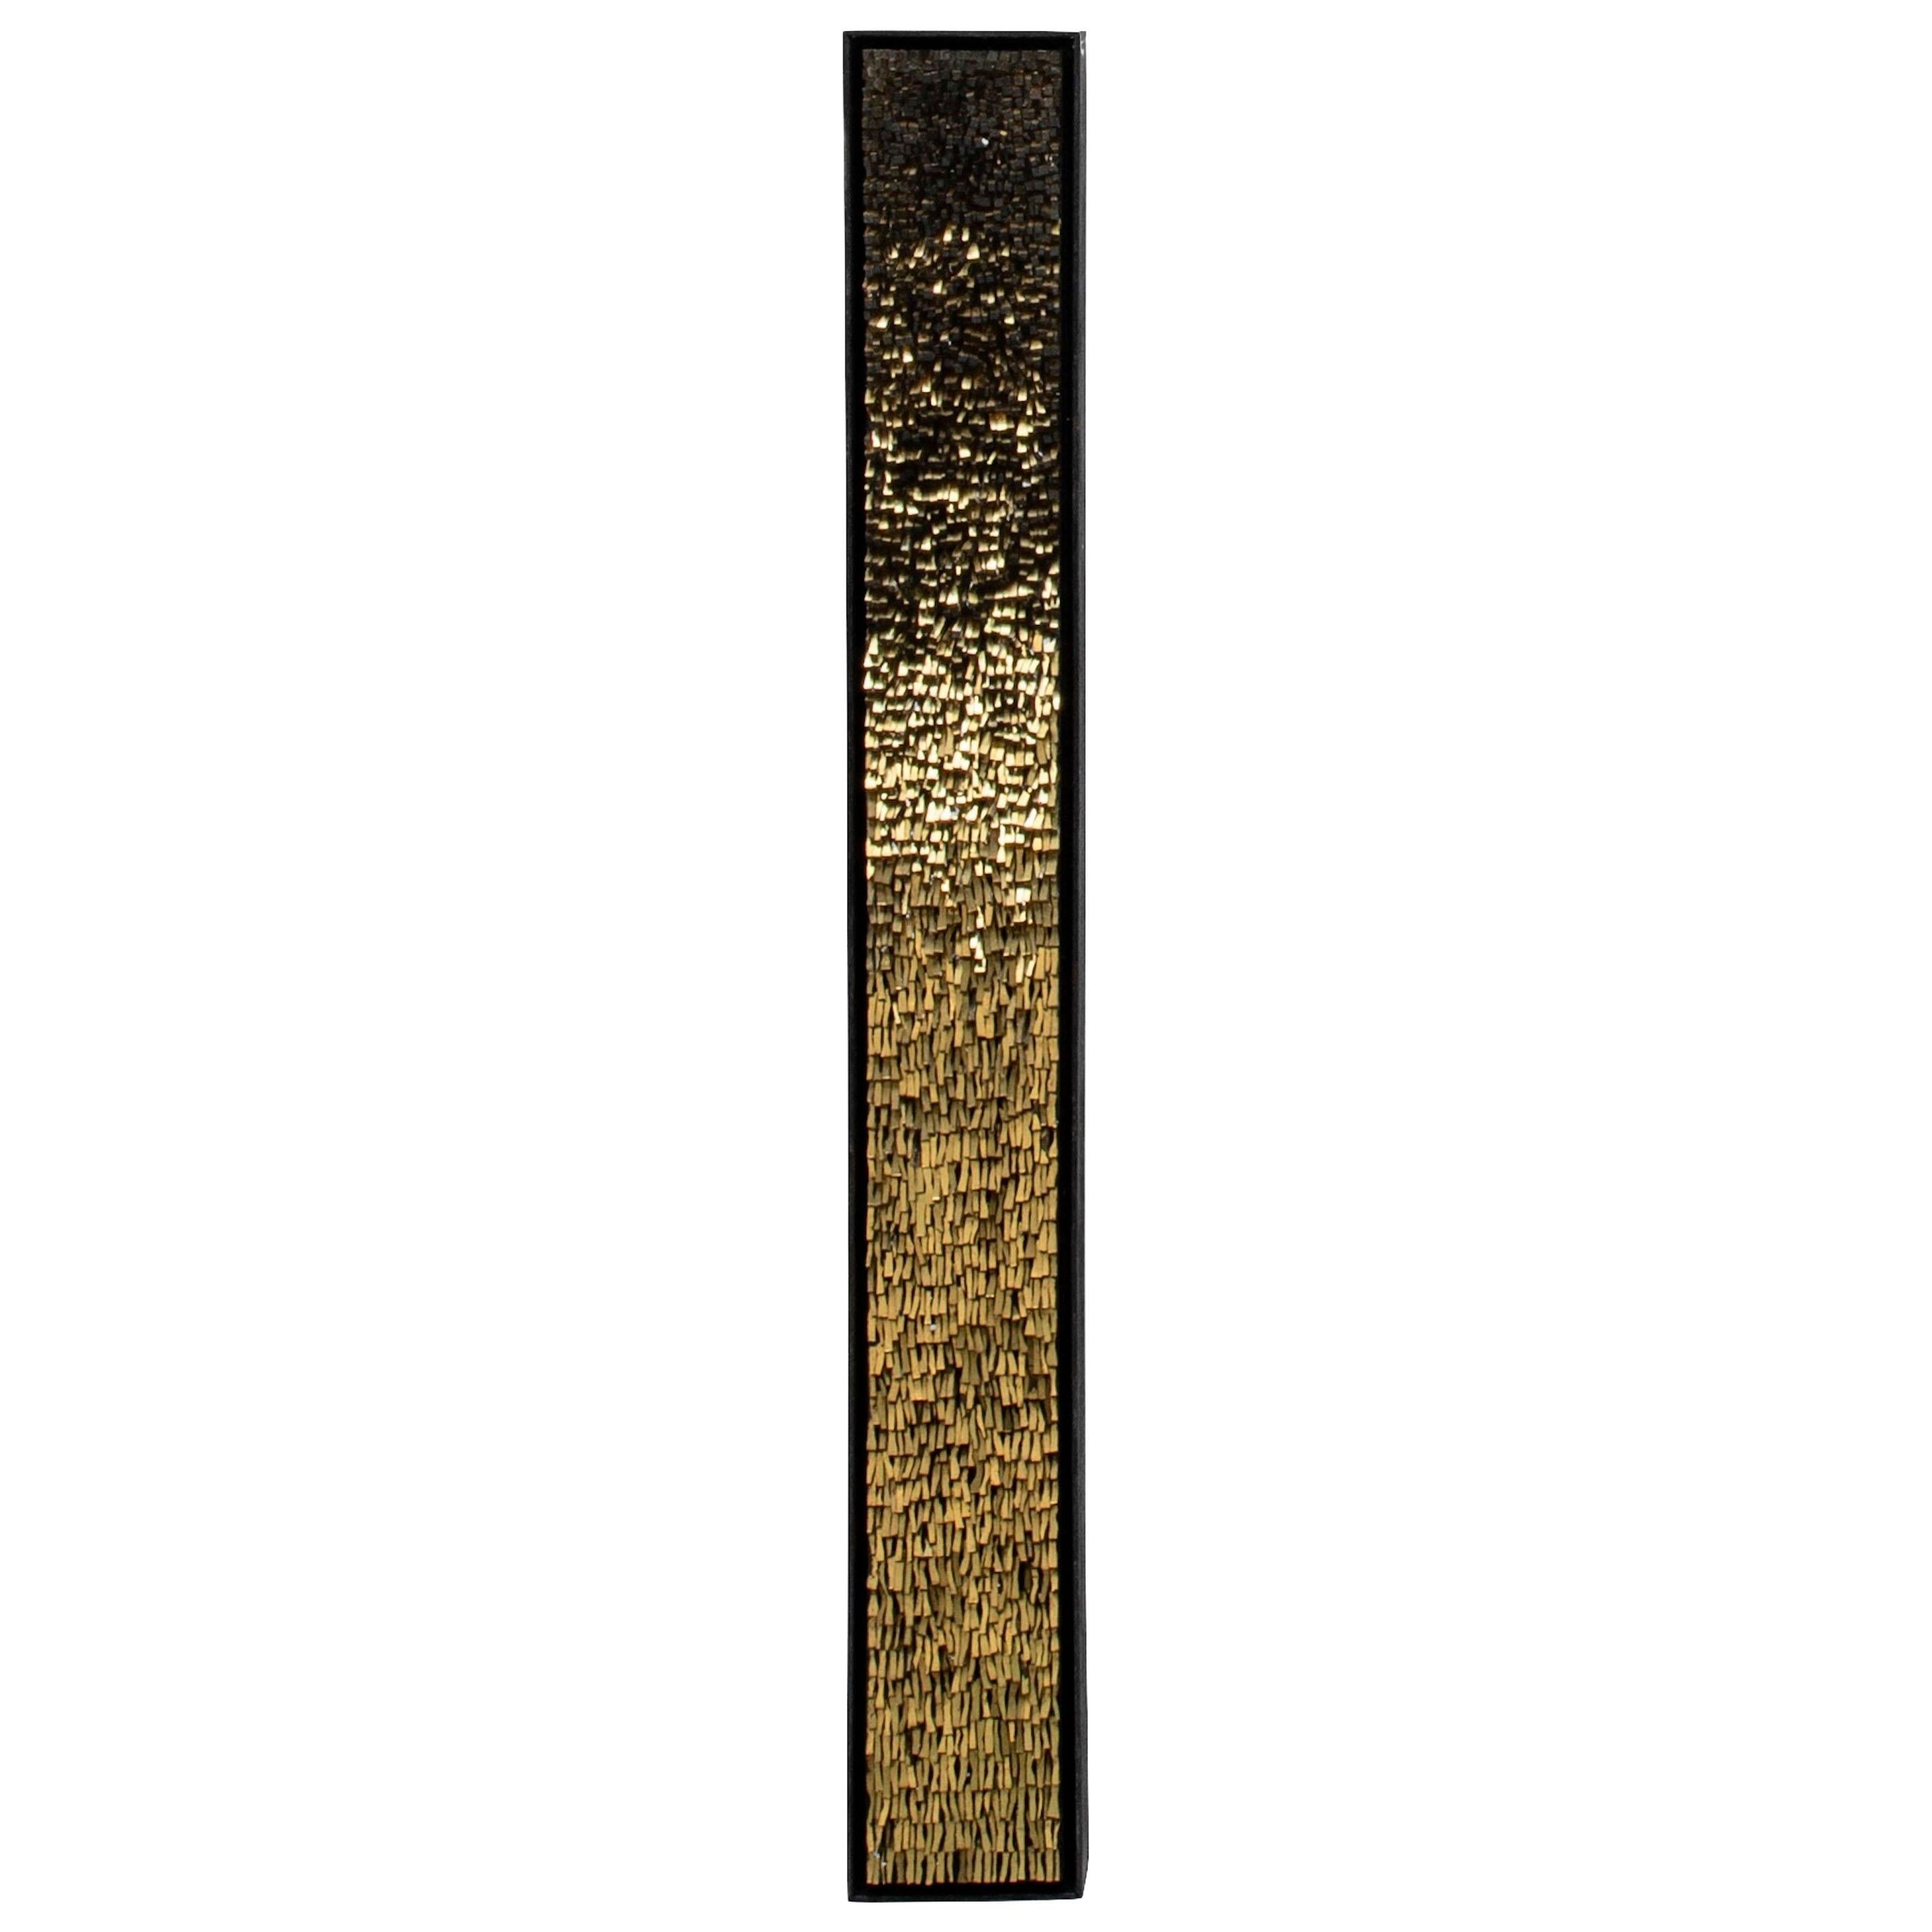 Murano Glass and Gold Leaf Mosaic, Movement Series by Artist Collective CaCO3 For Sale